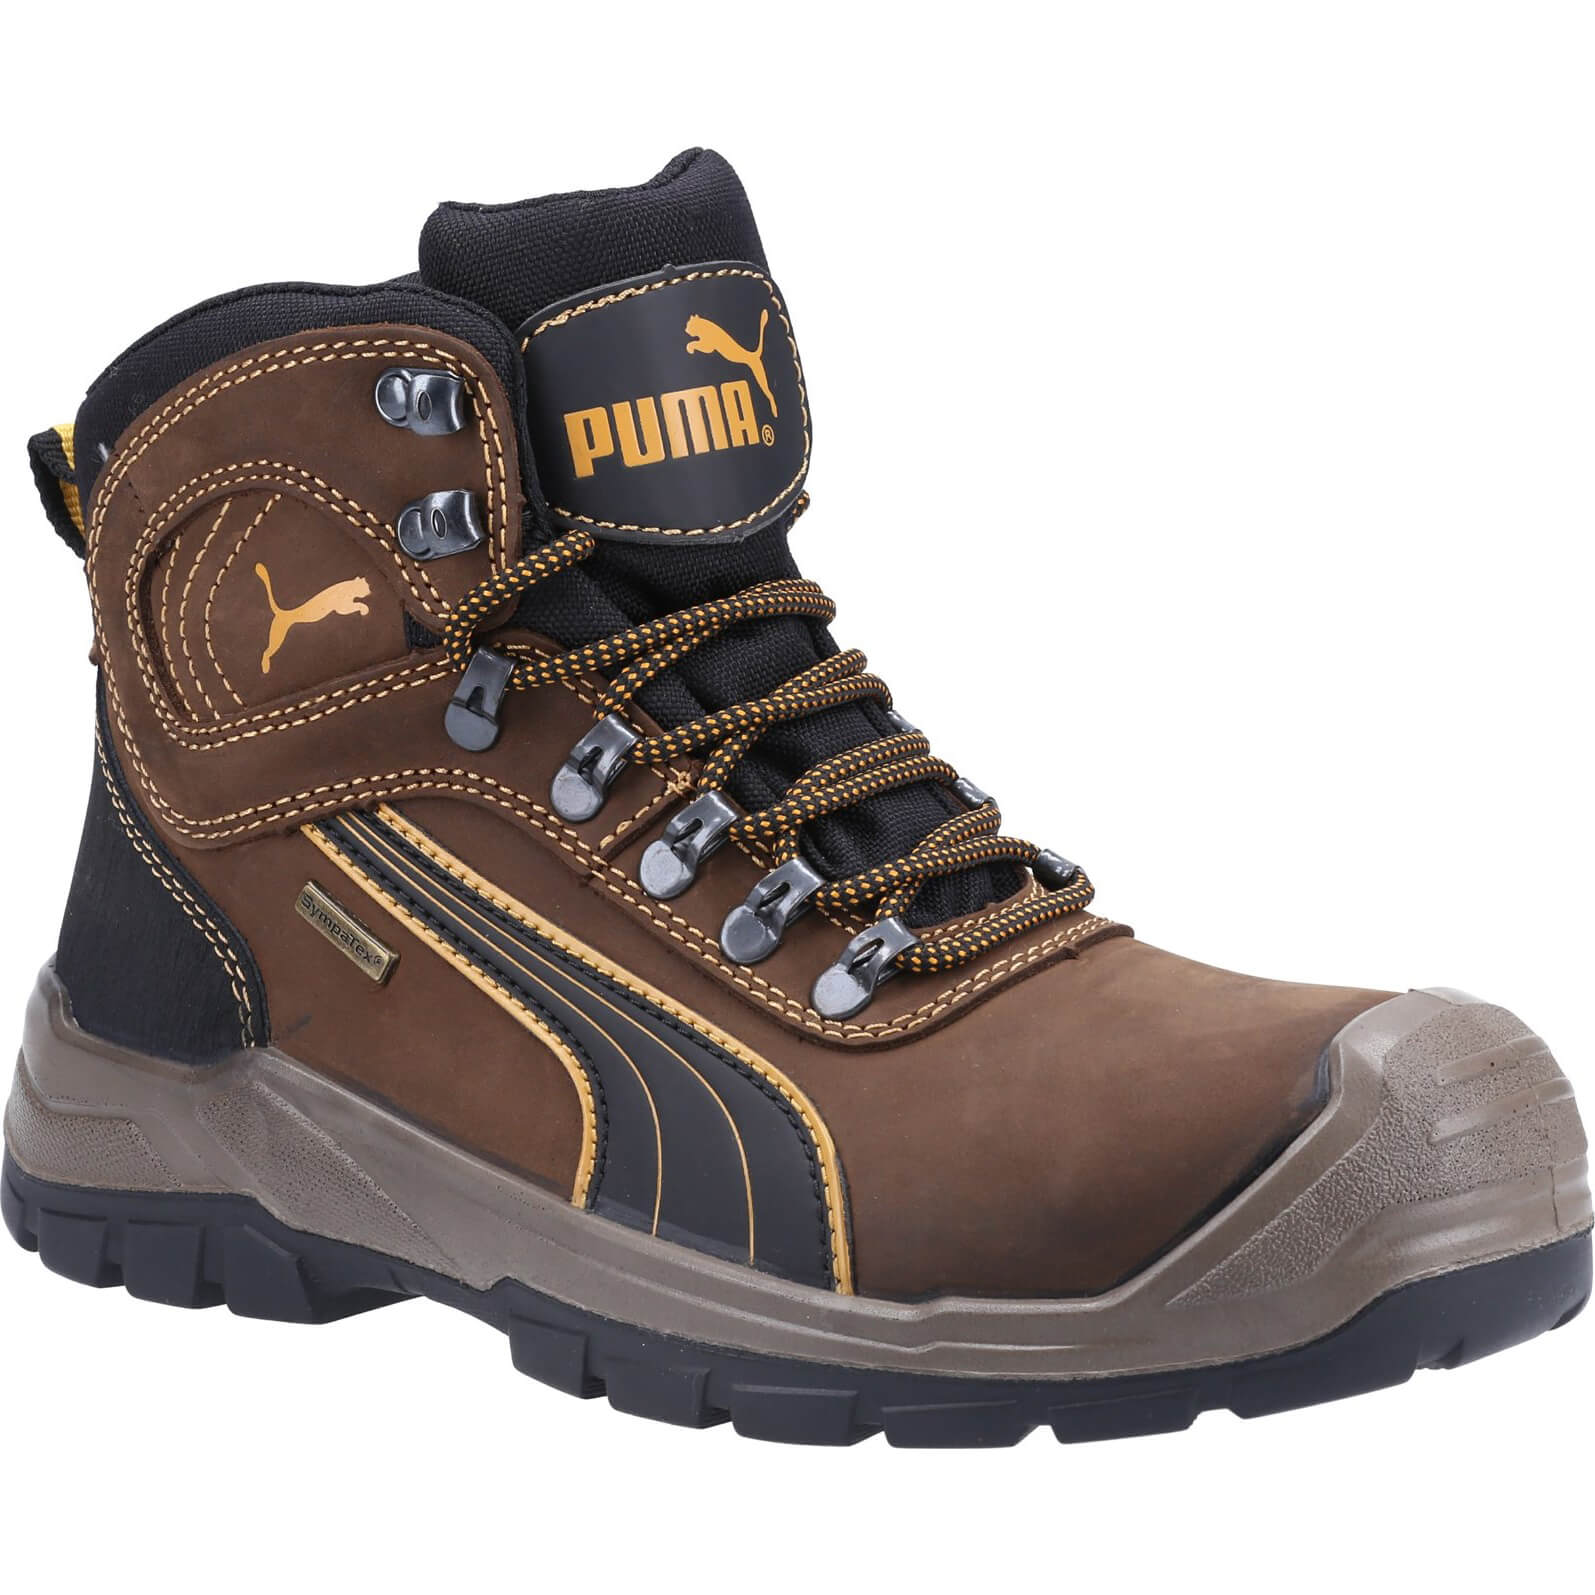 Puma Mens Sierra Nevada Mid Safety Boots Brown Size 9